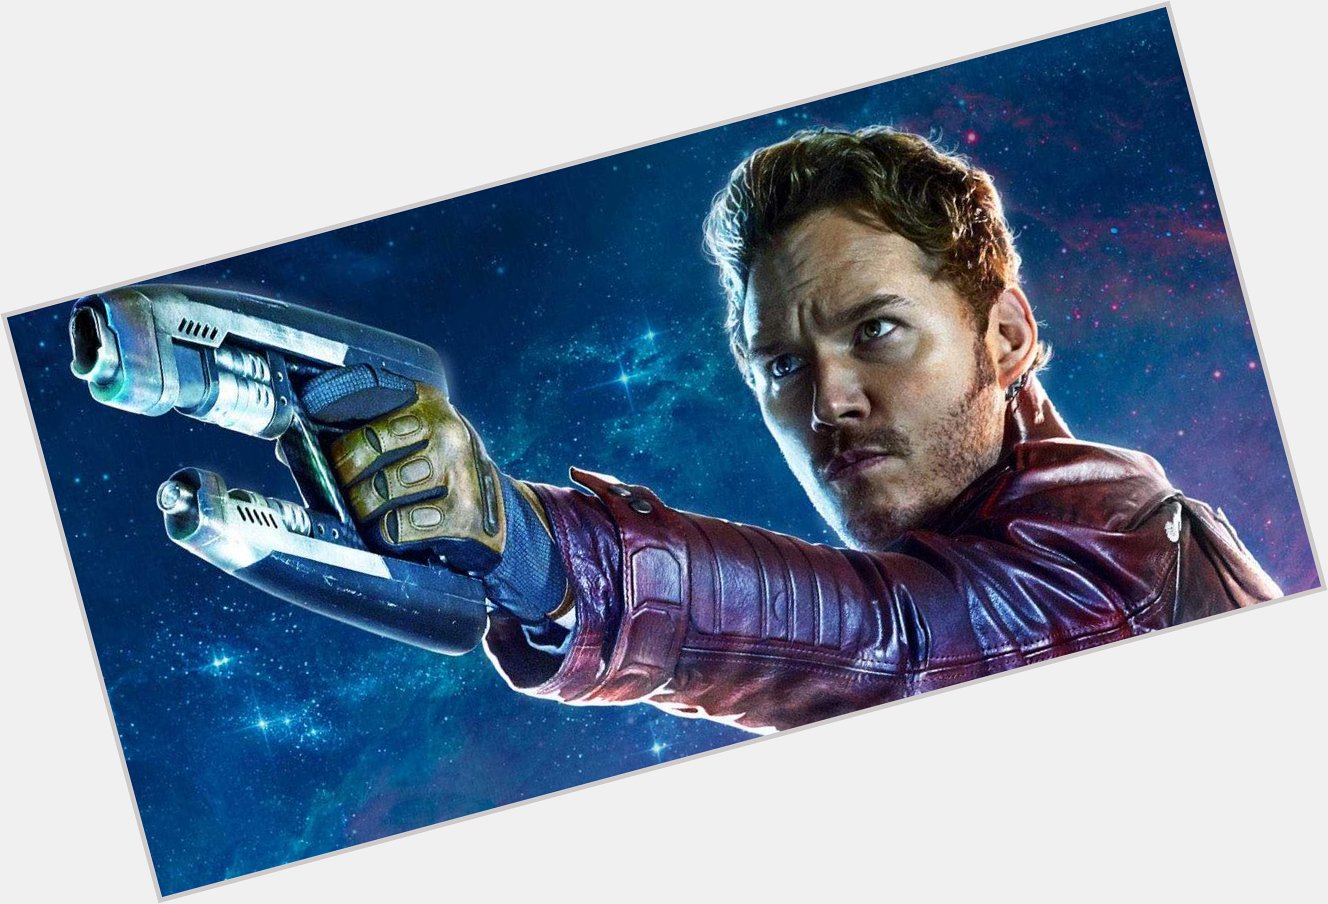 Happy 41st birthday to Chris Pratt, star of GUARDIANS OF THE GALAXY 1 and 2, PASSENGERS, JURASSIC WORLD, and more! 